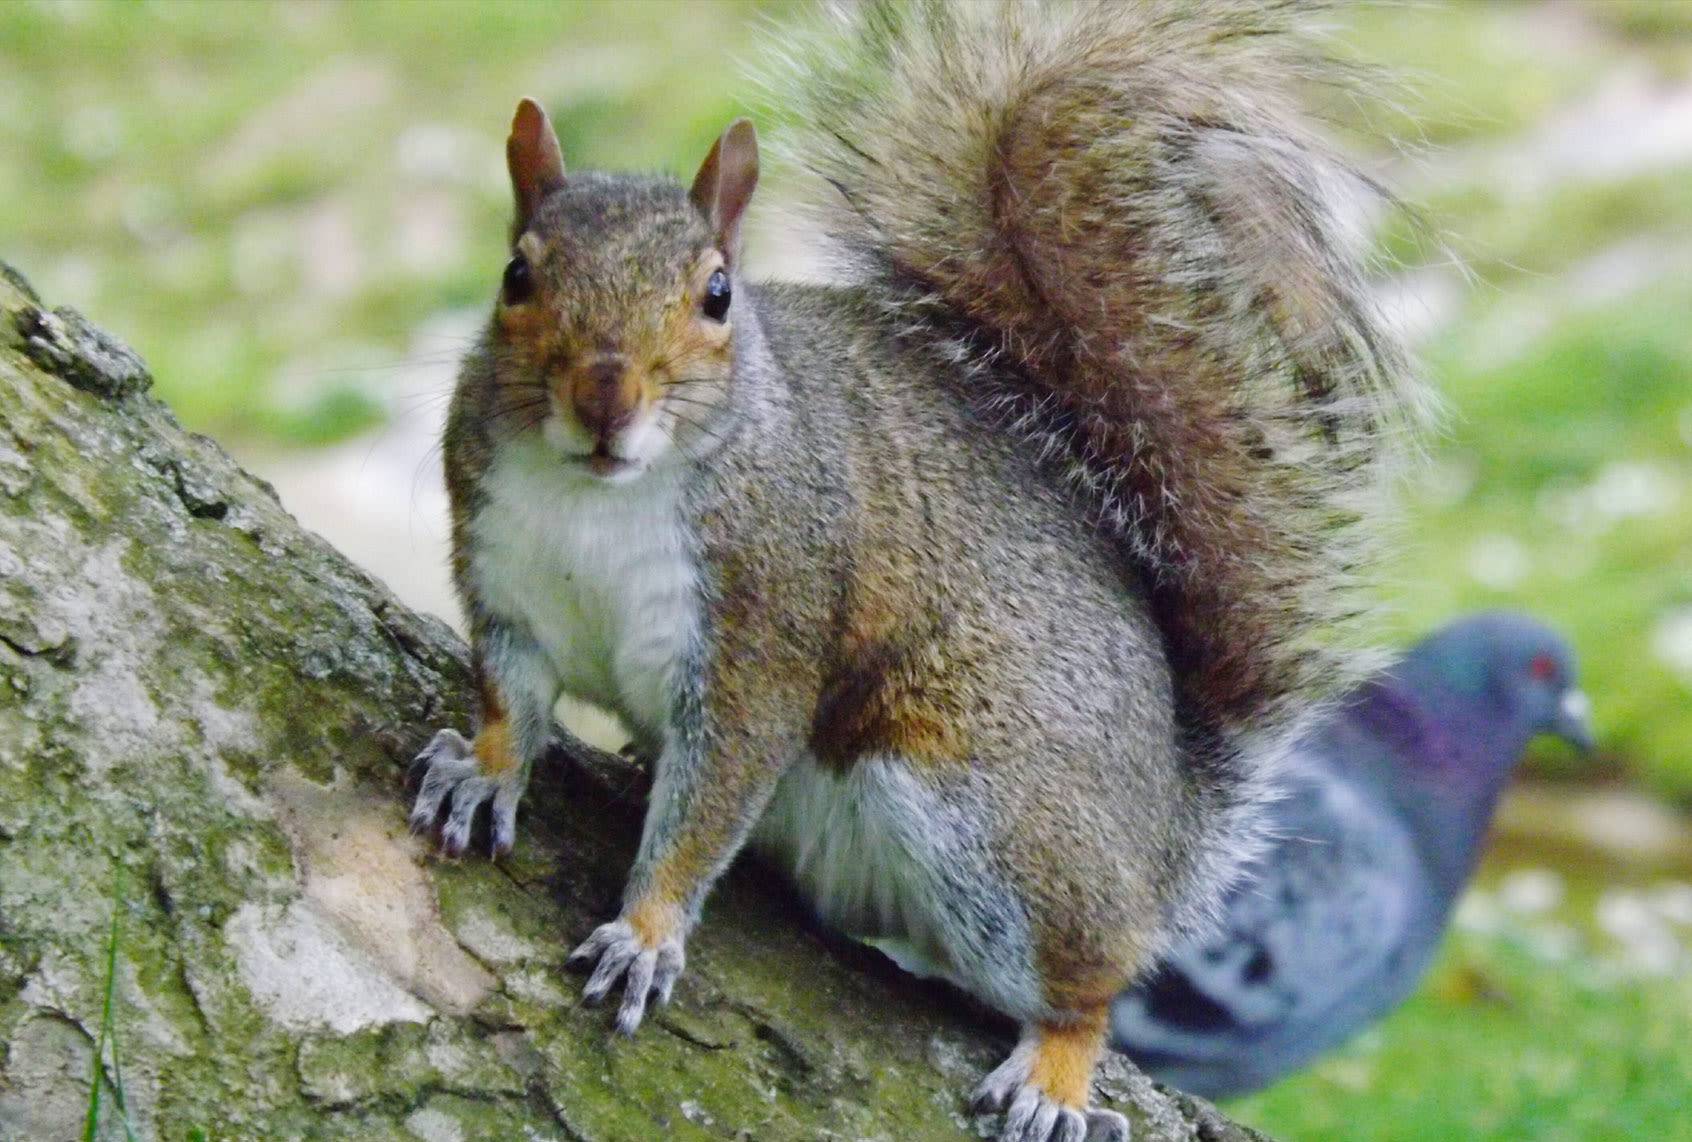 How squirrels cope with stress: New study may offer climate lessons for humans